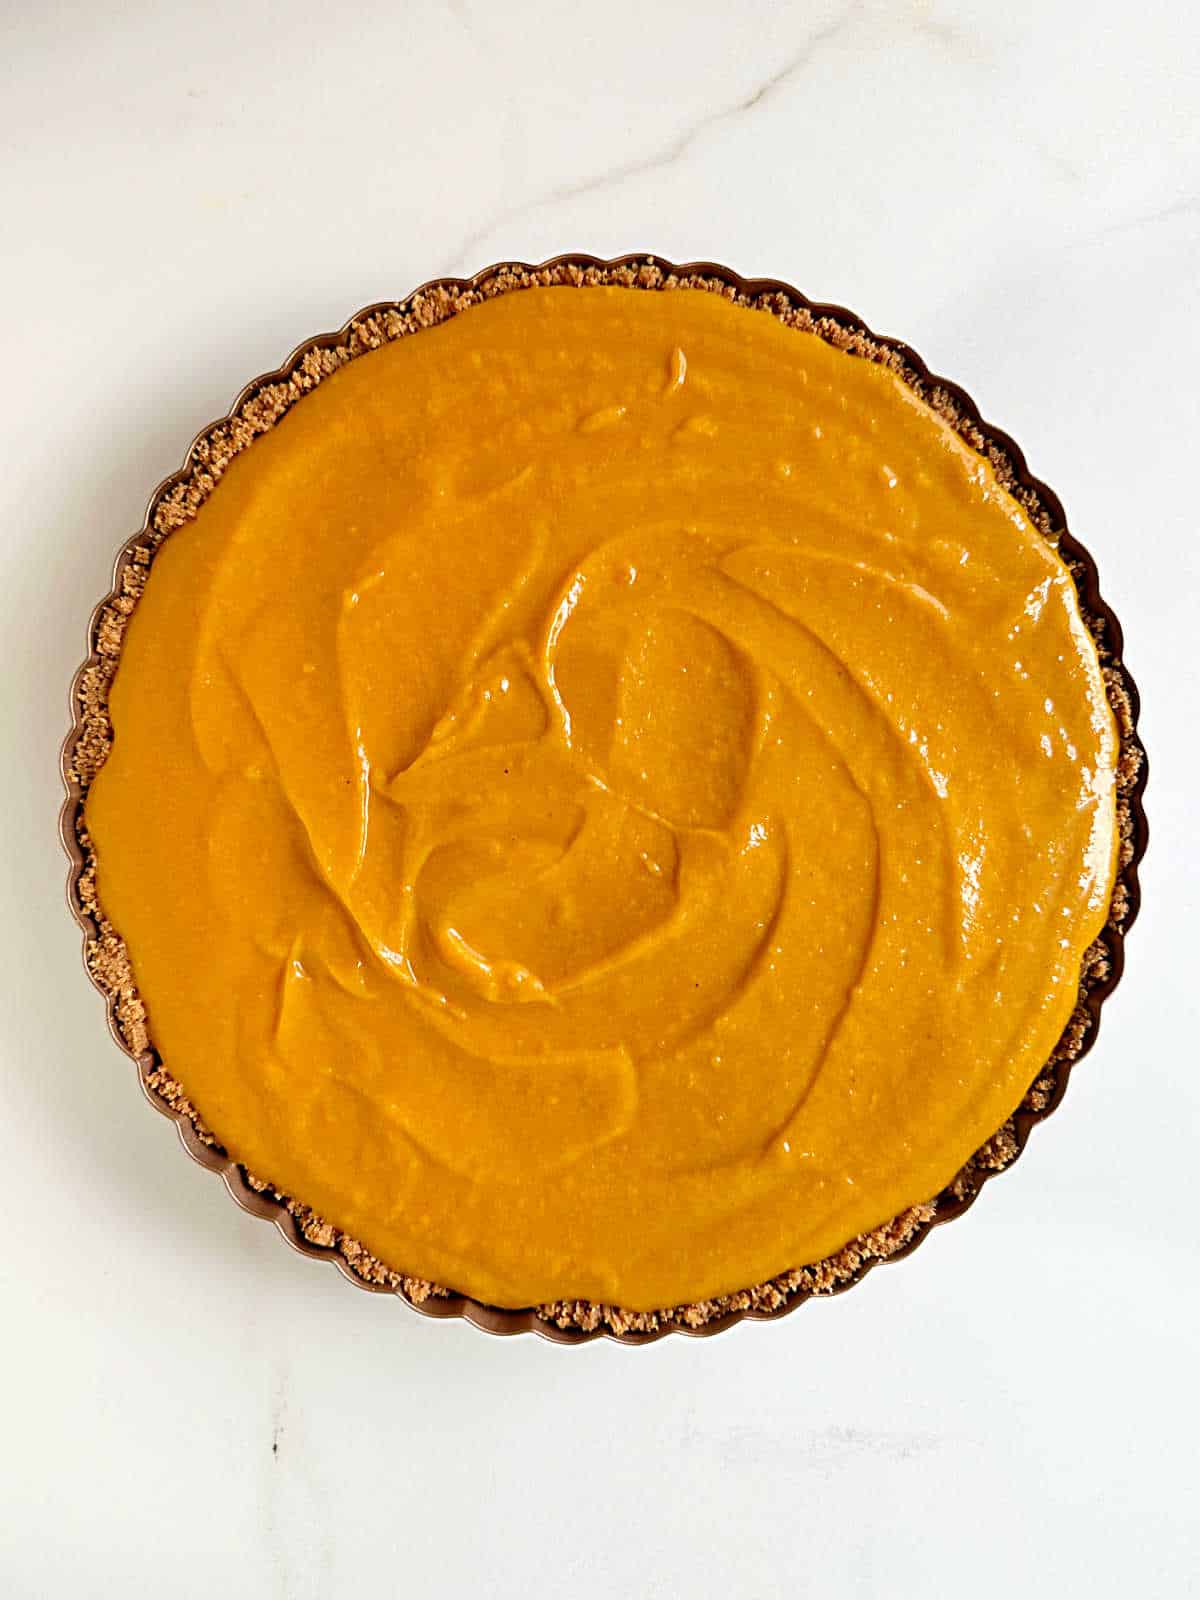 Round metal pan with sweet potato pie filling on a white surface. Top view.